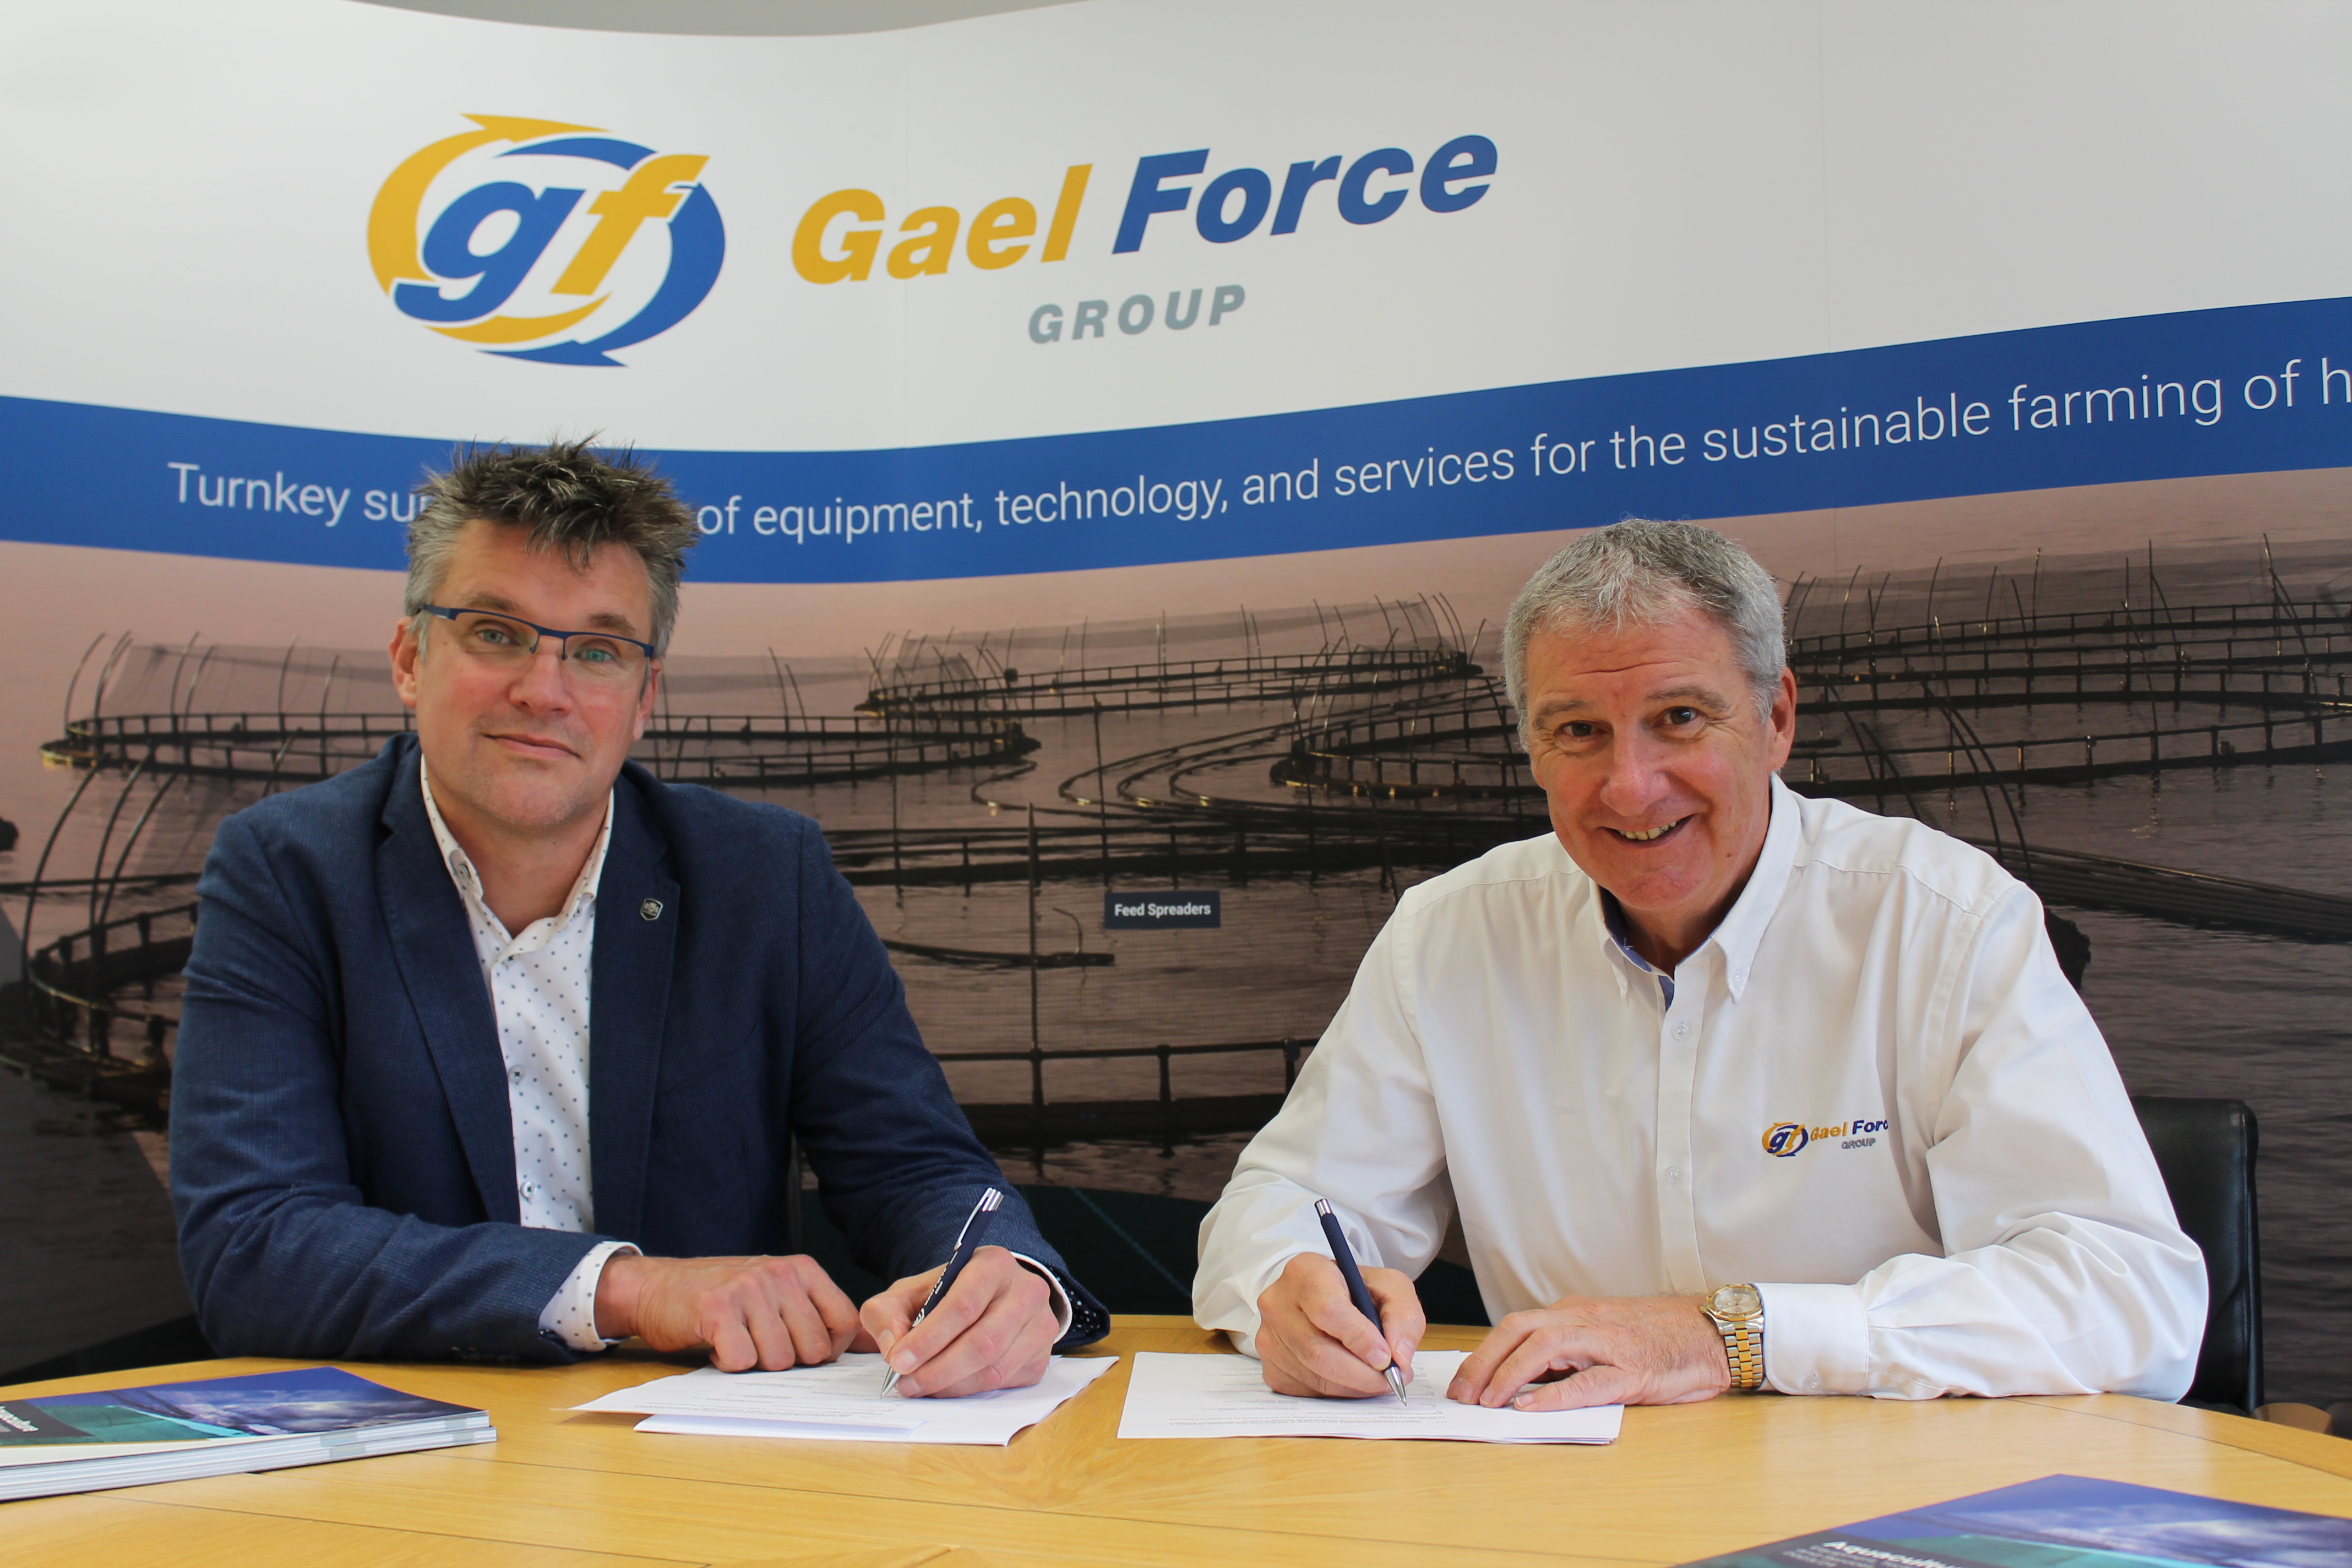 Left: Gerrit Knol, Technical Director and Naval Architect of Nauplius. Right: Stewart Graham, Managing Director of Gael Force Group.